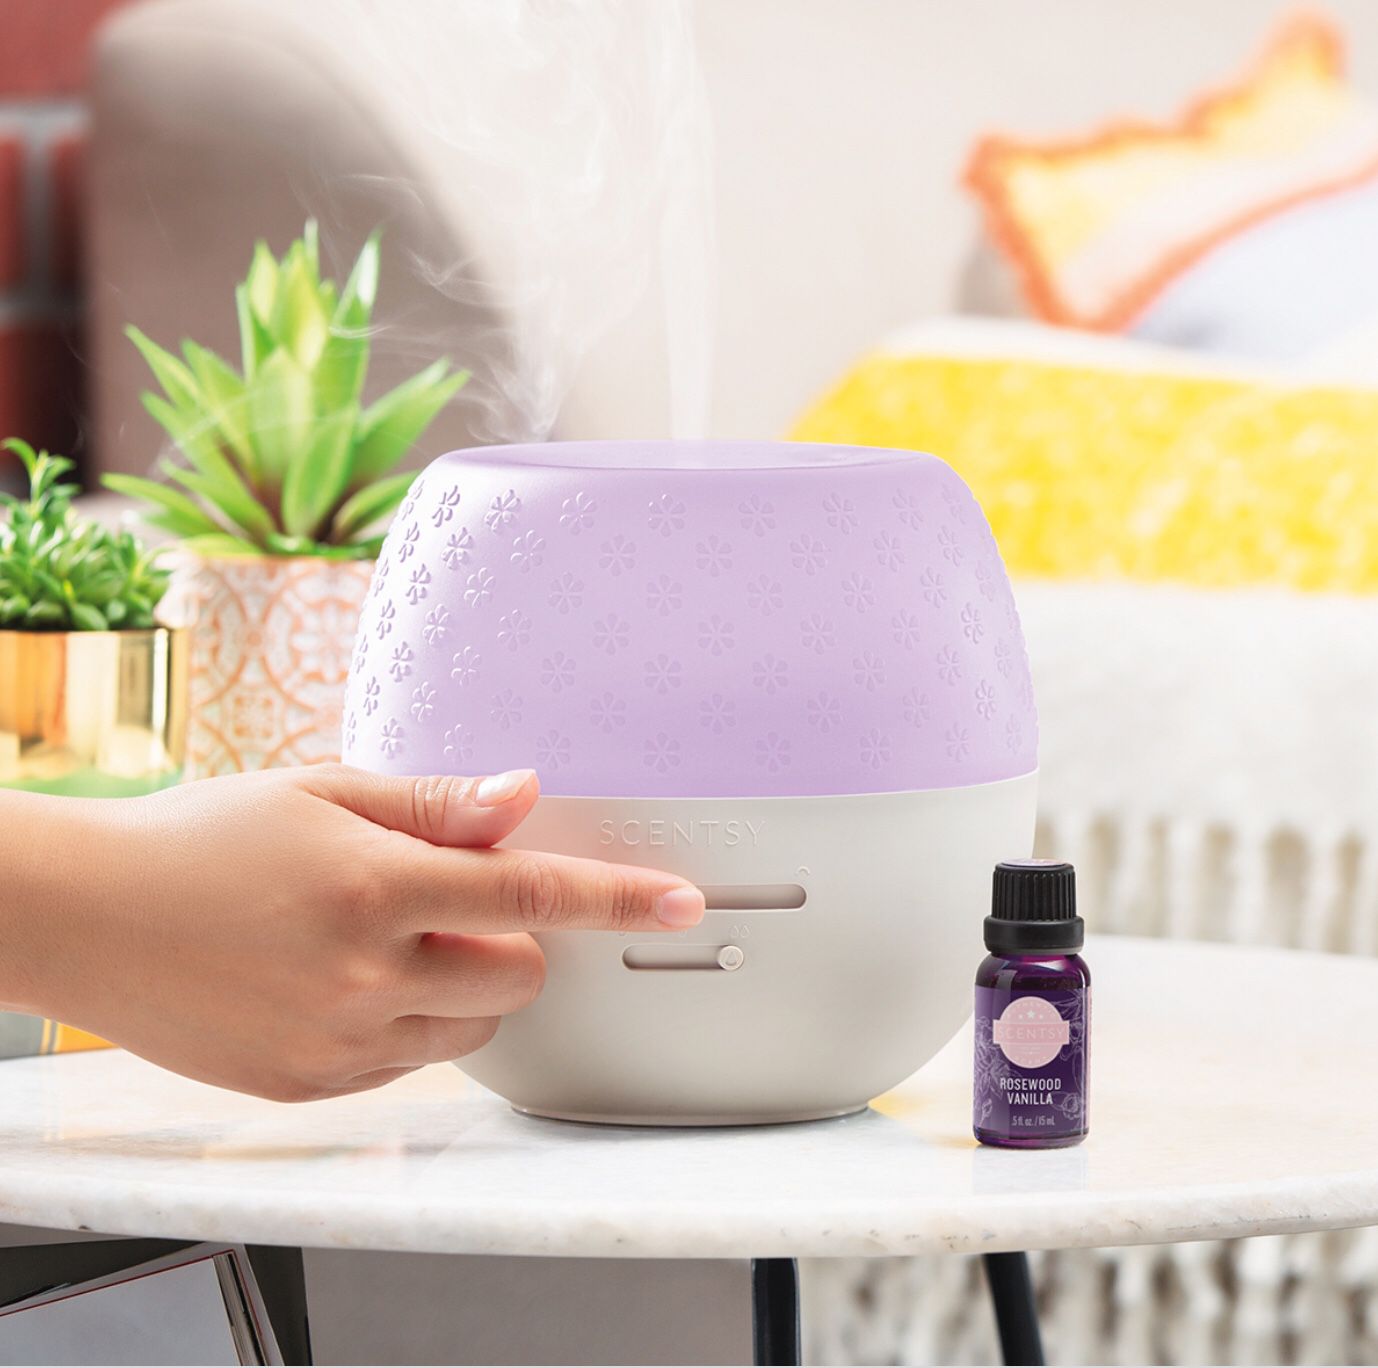 Scentsy Independent Consultant 